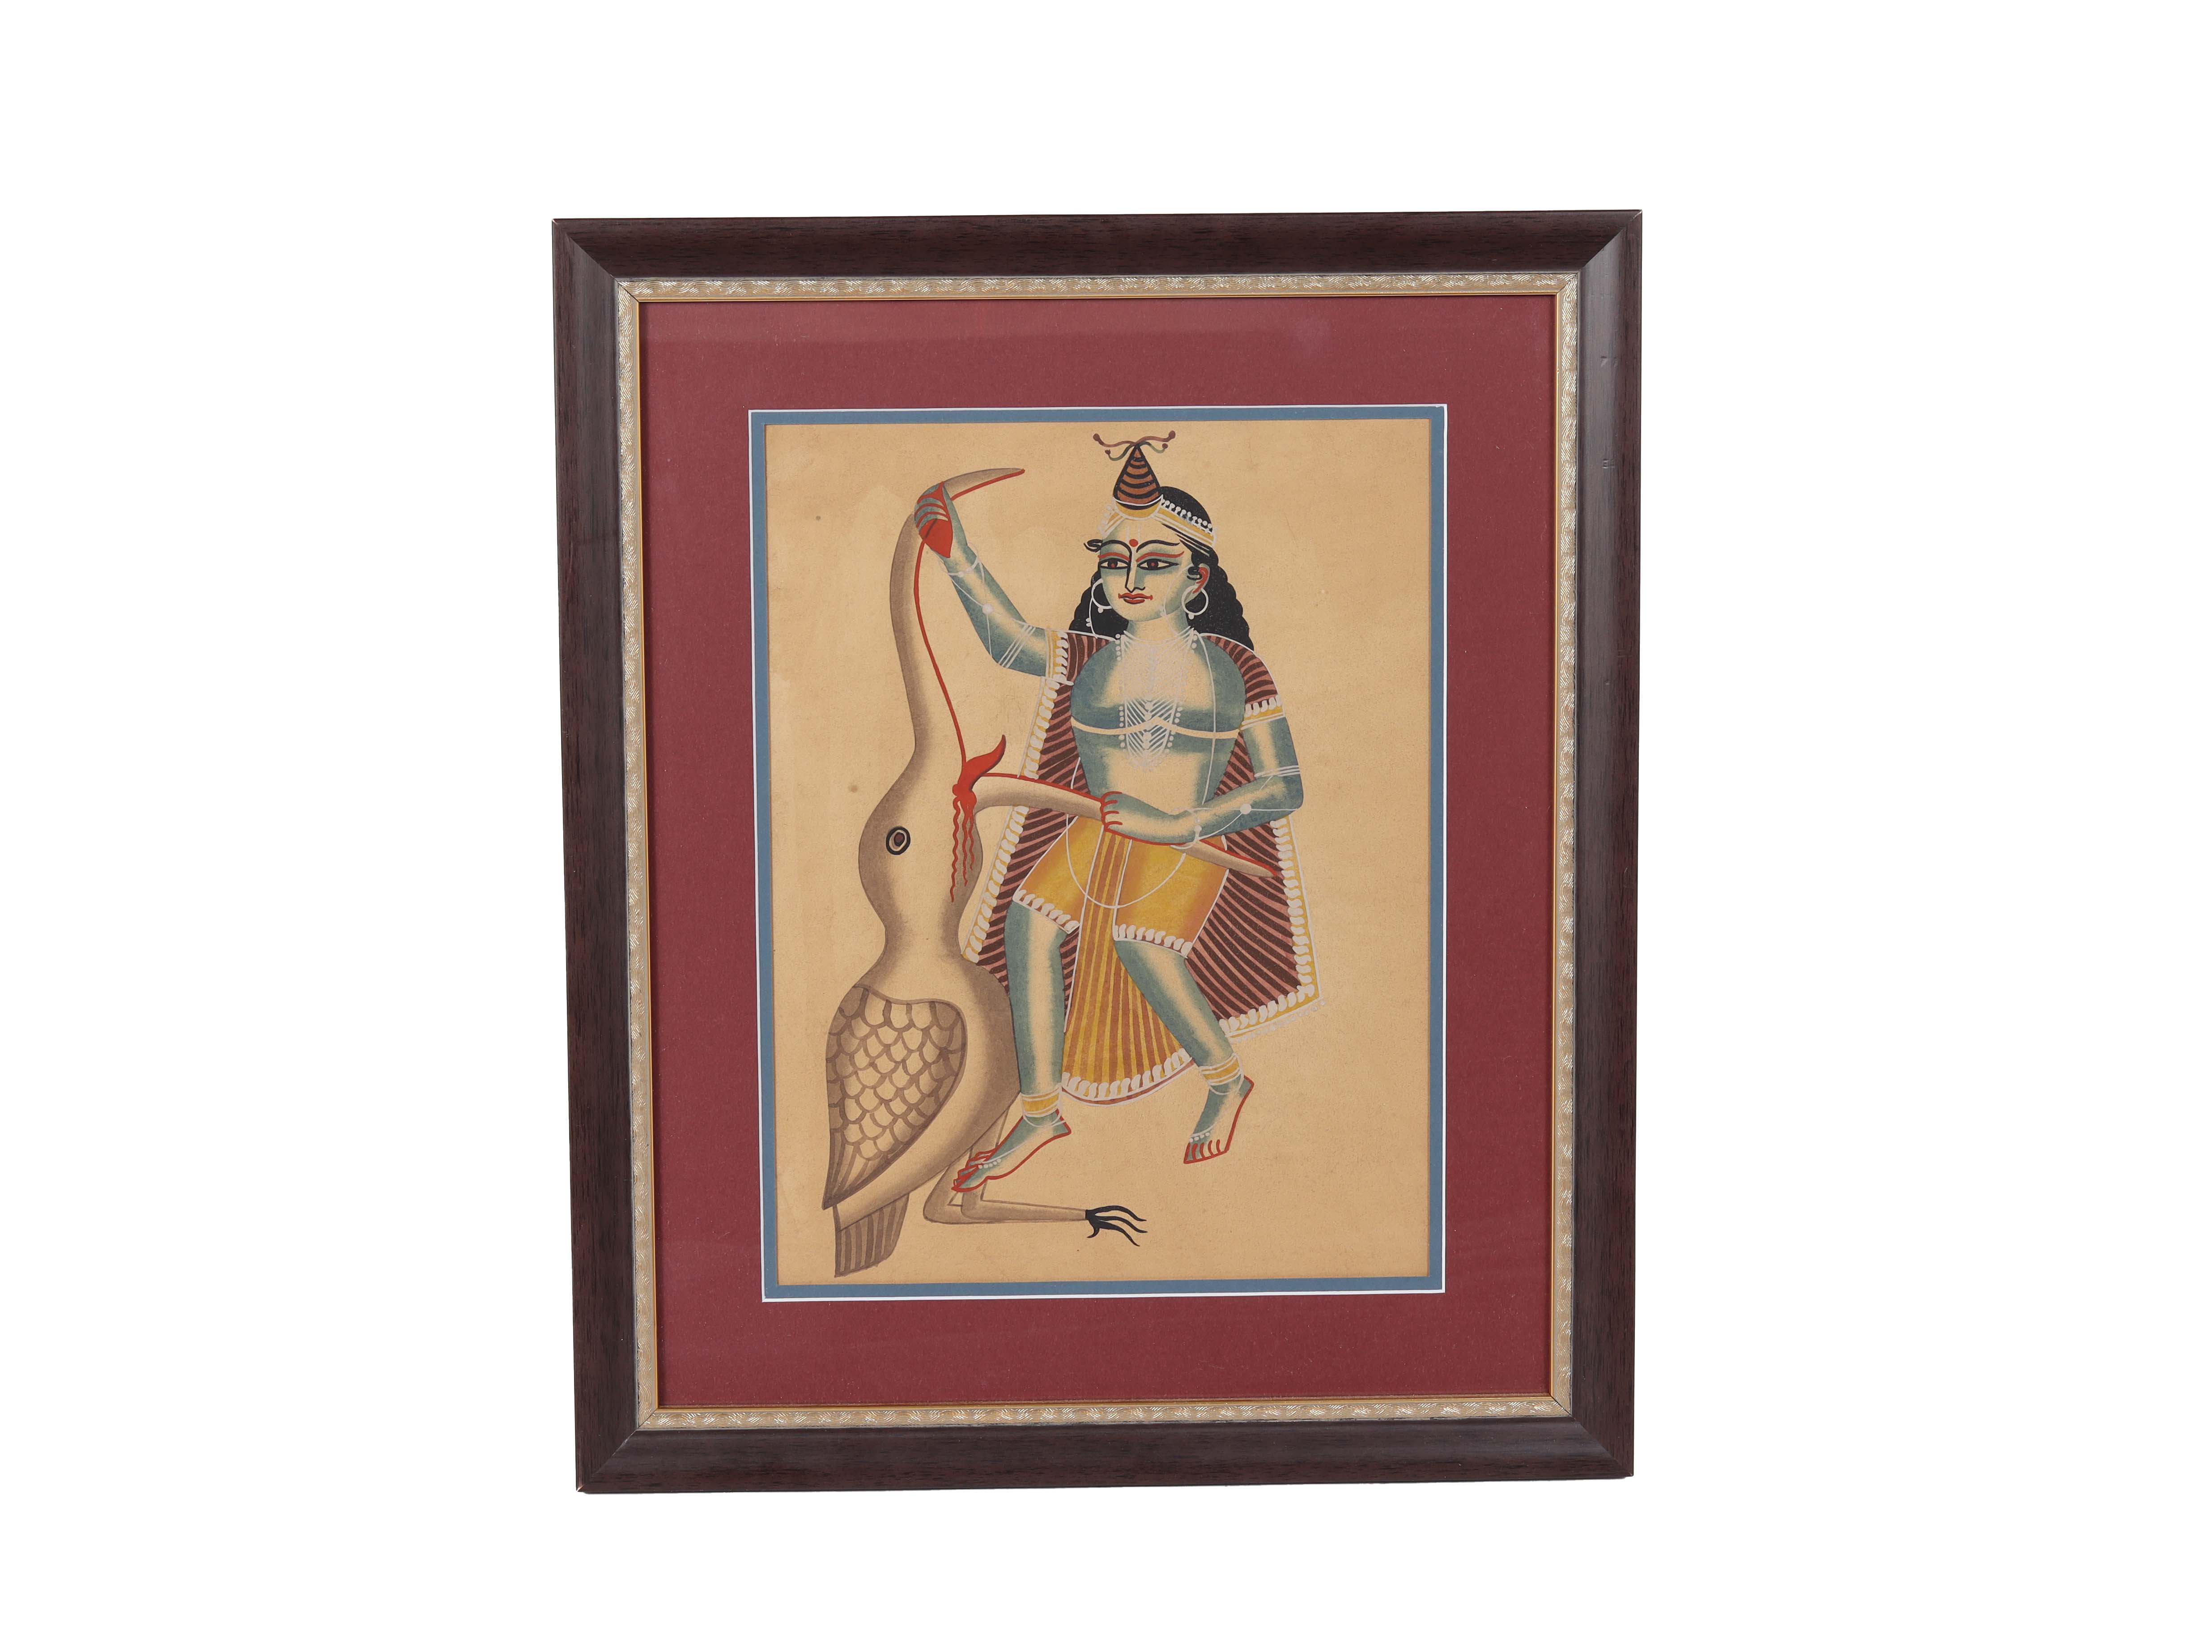 A CONTEMPORARY KALIGHAT-STYLE ARTWORK